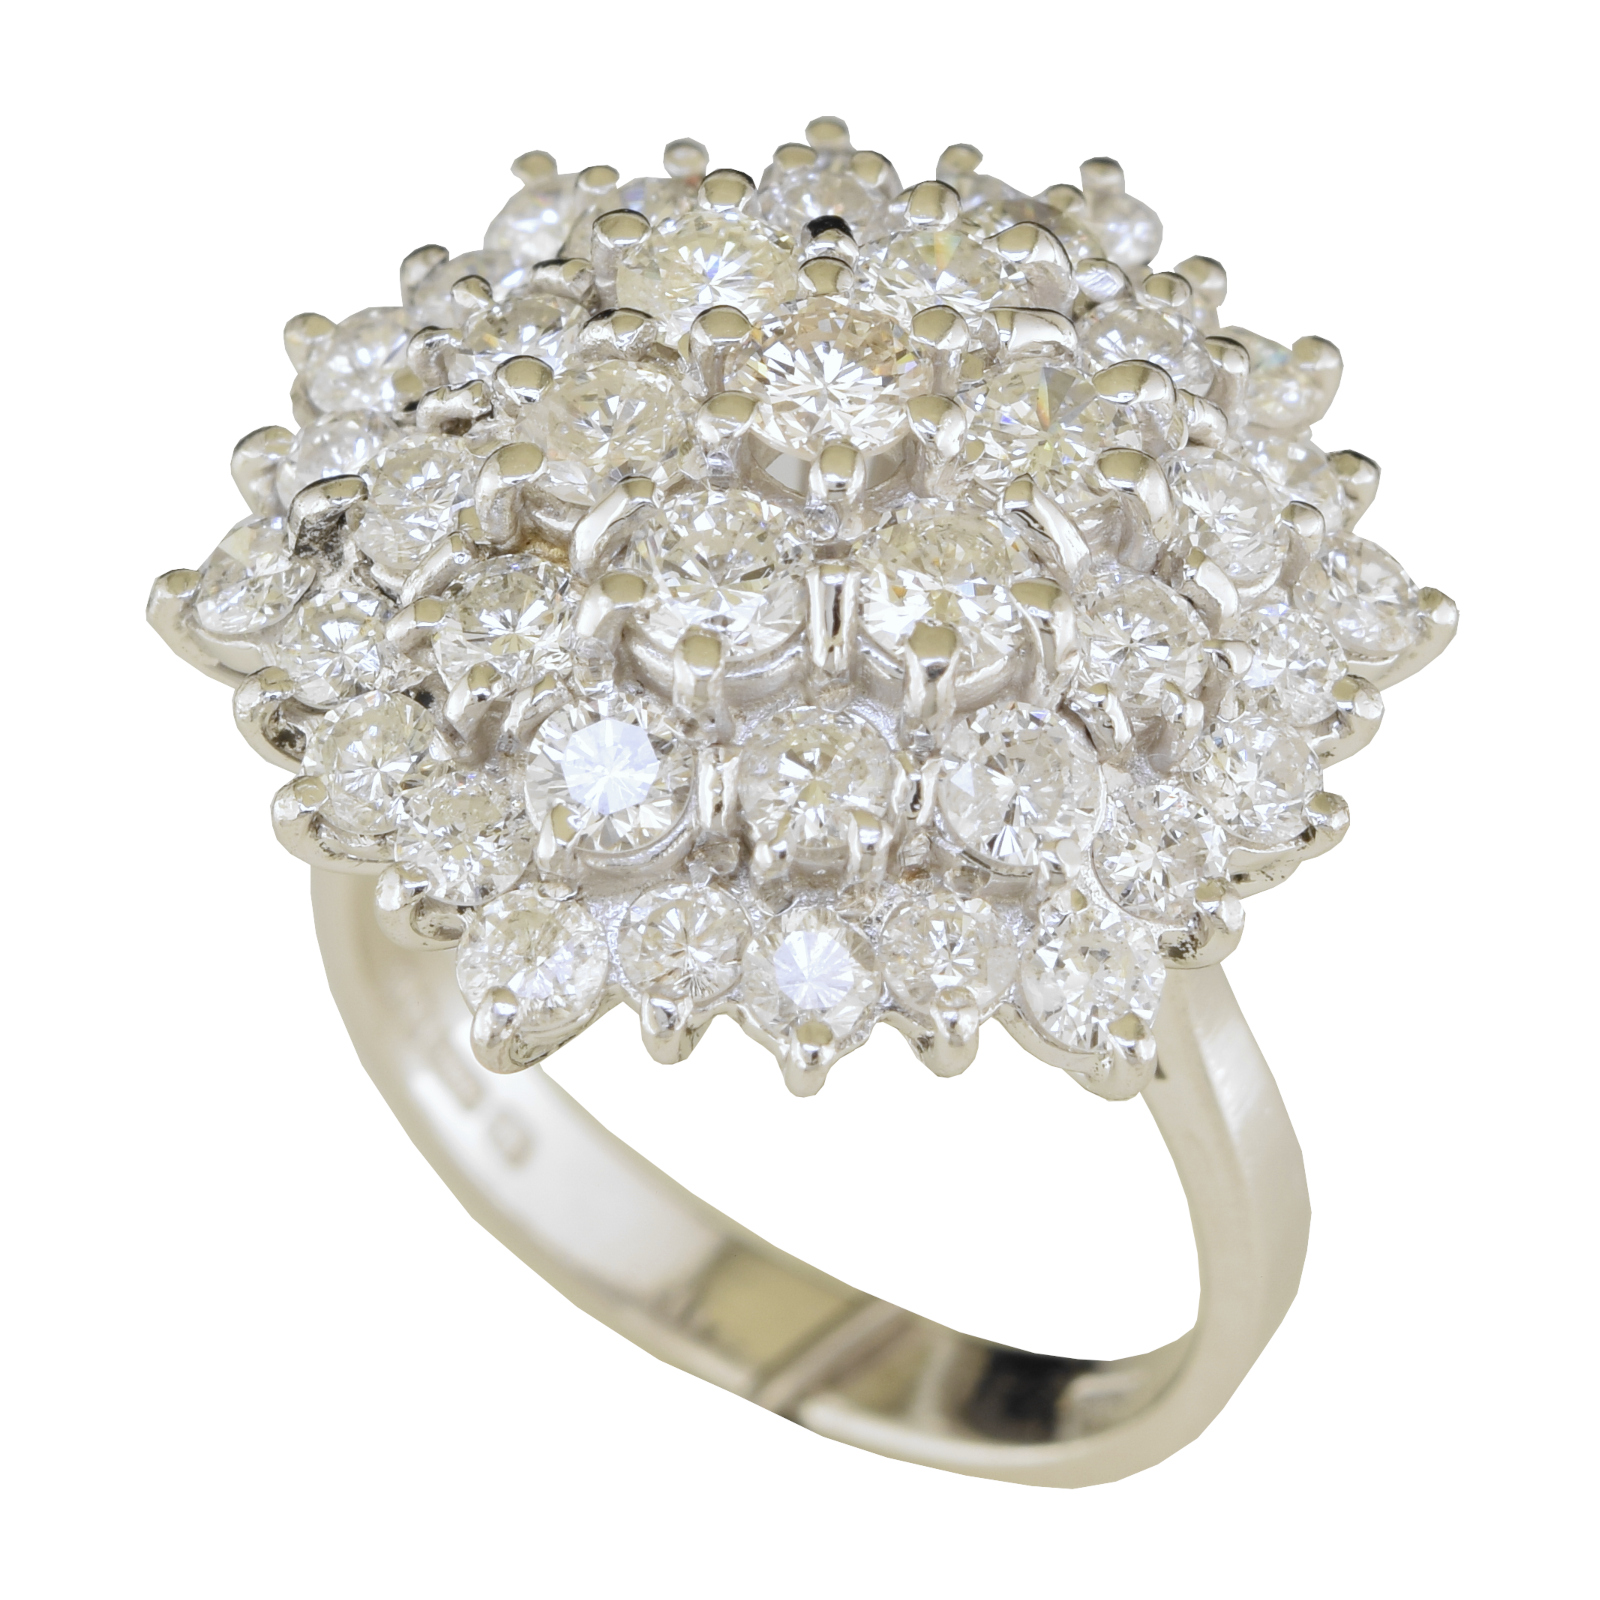 Large 18ct Gold Diamond Cluster Ring - 3.09cts